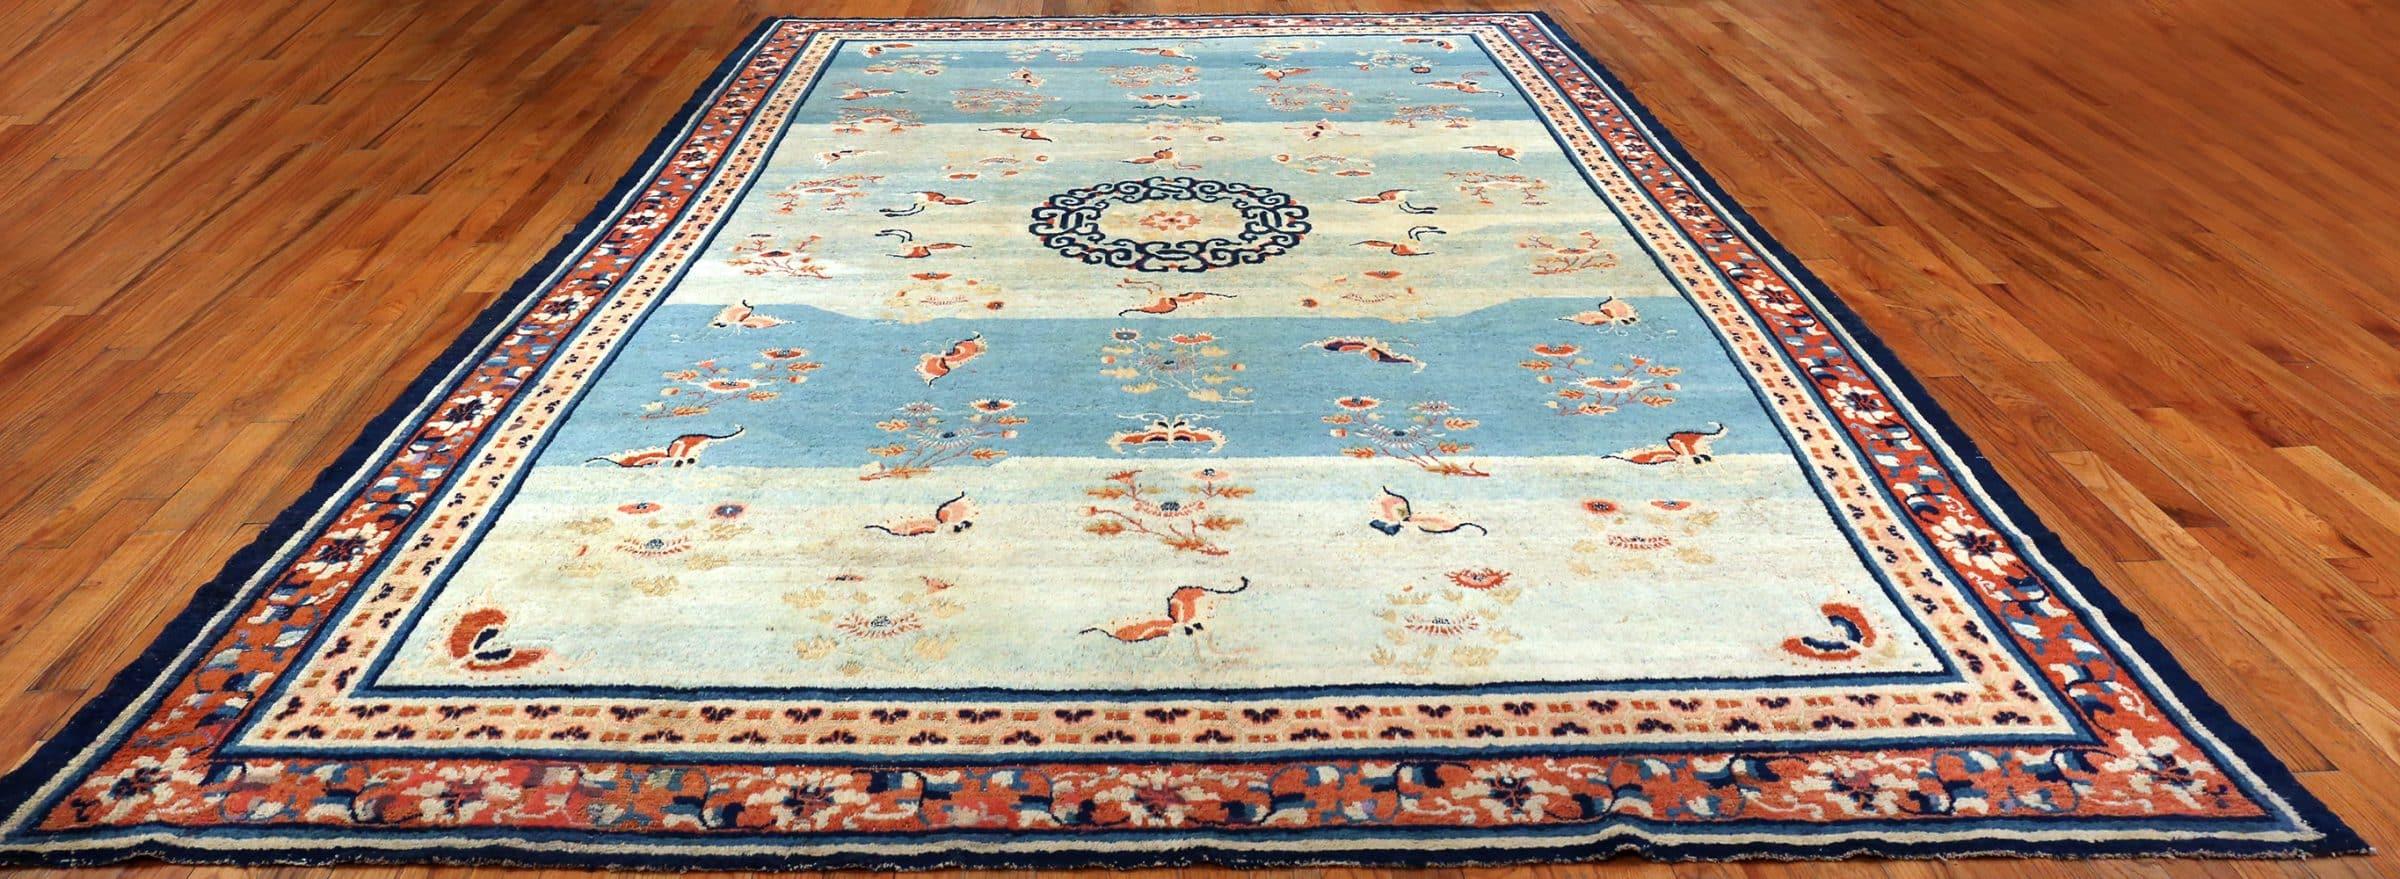 Hand-Knotted 18th Century Kansu Carpet from China. Size: 9 ft 4 in x 14 ft 2 in